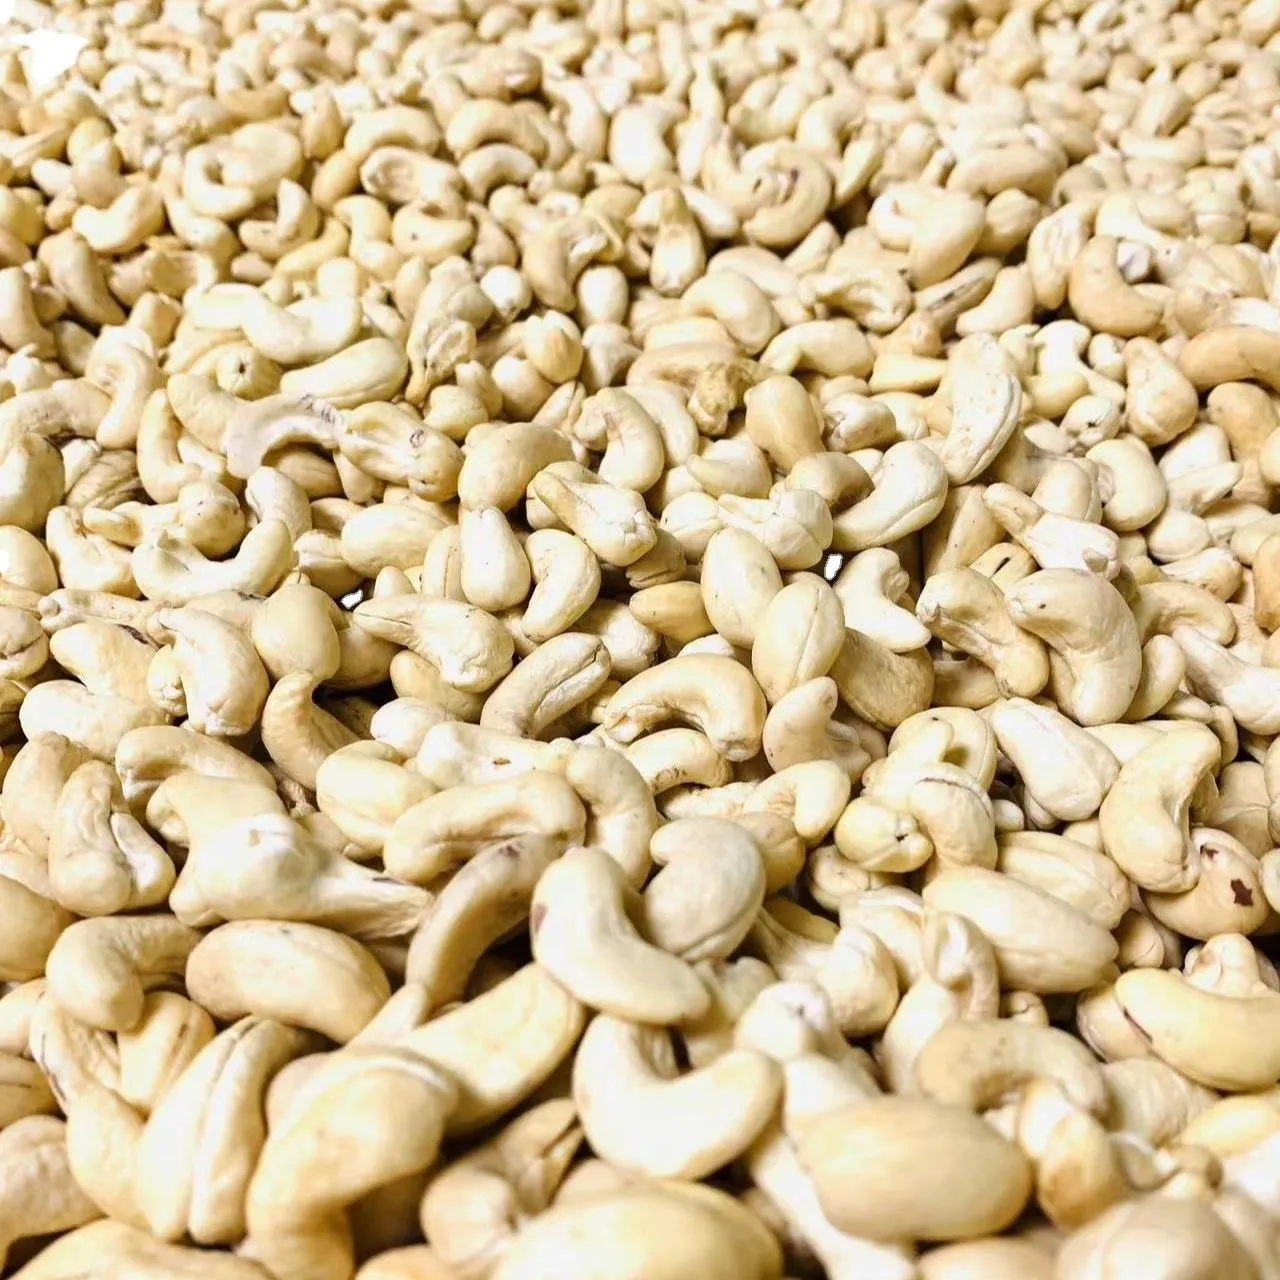 Buy bulk wholesale cashew nuts at an exceptional price